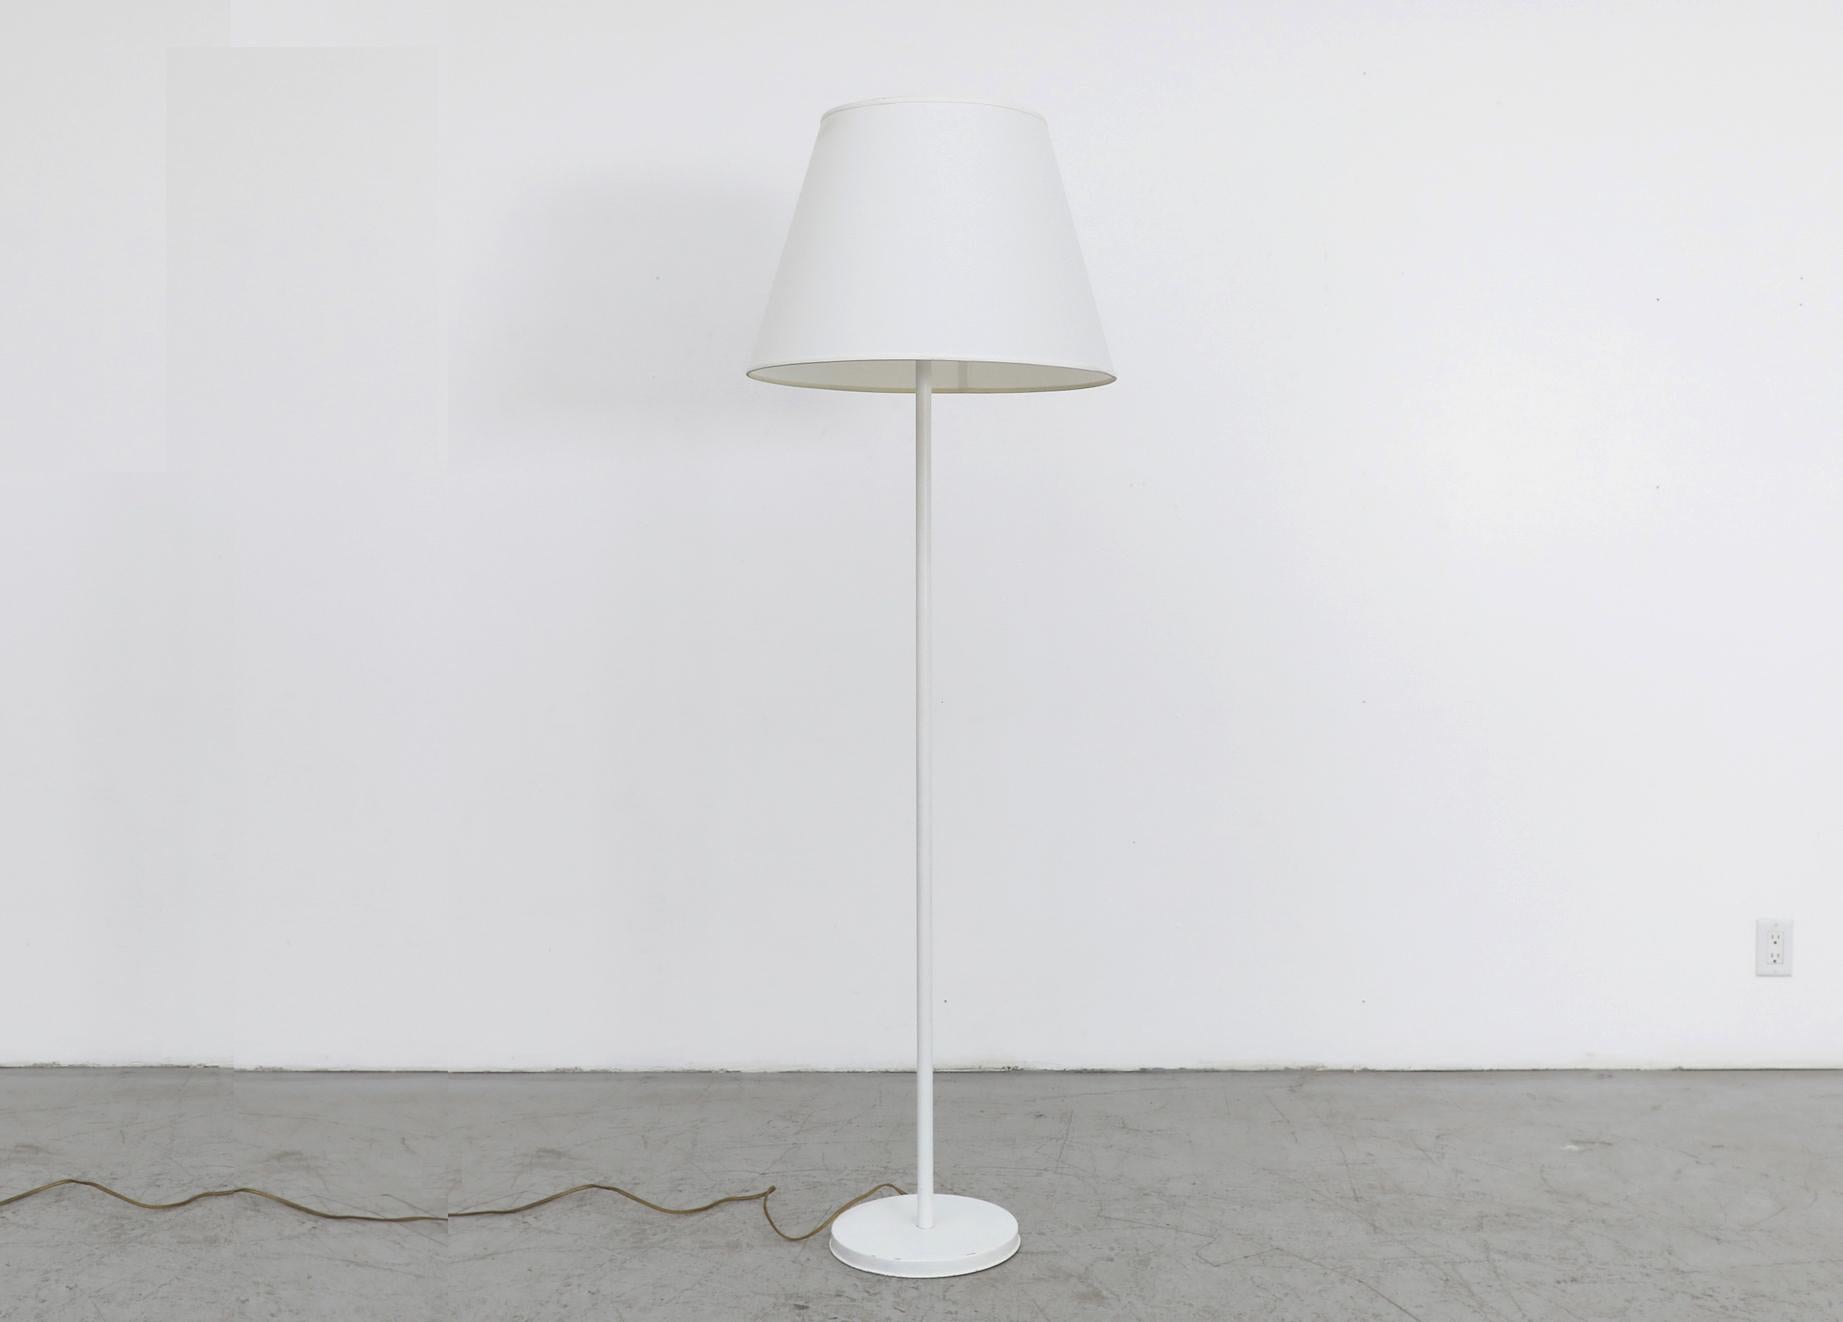 Mid-Century standing floor lamp with white enameled metal stem and base, circa 1960. Newer white linen tapered drum shade. In original condition with visible wear consistent with its age and use.